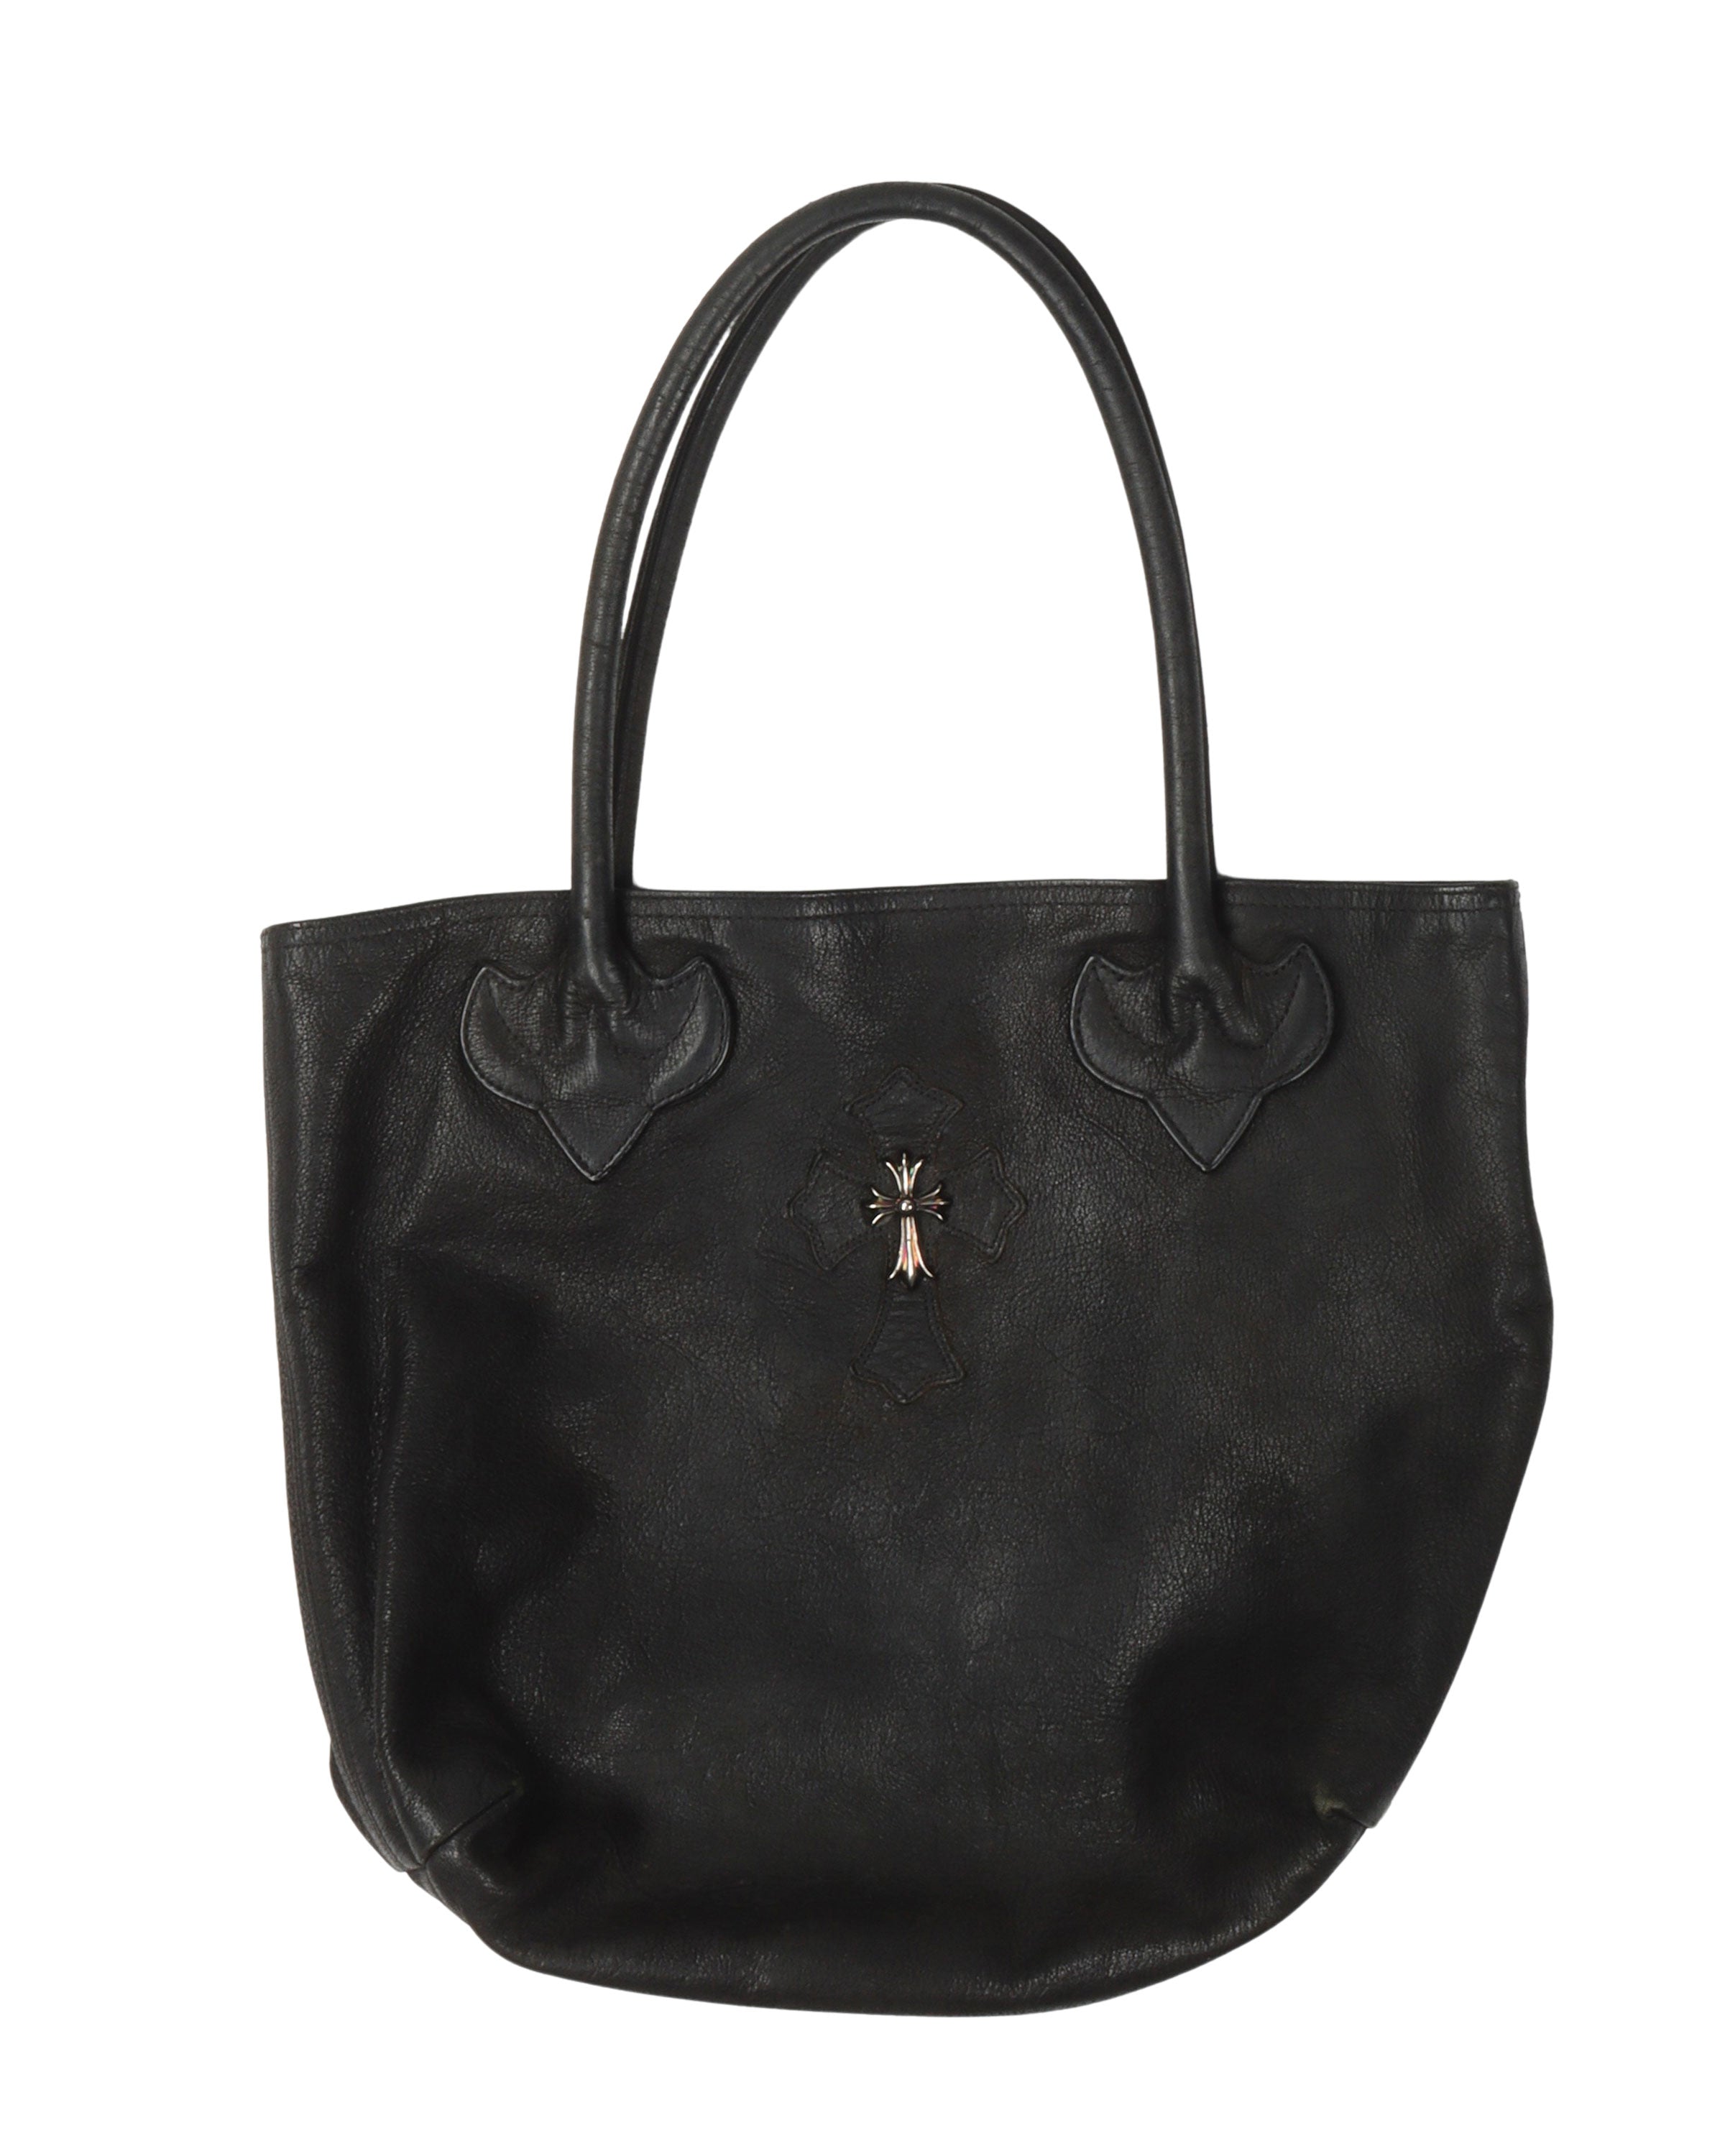 Chrome Hearts Cross Embellished Leather Tote